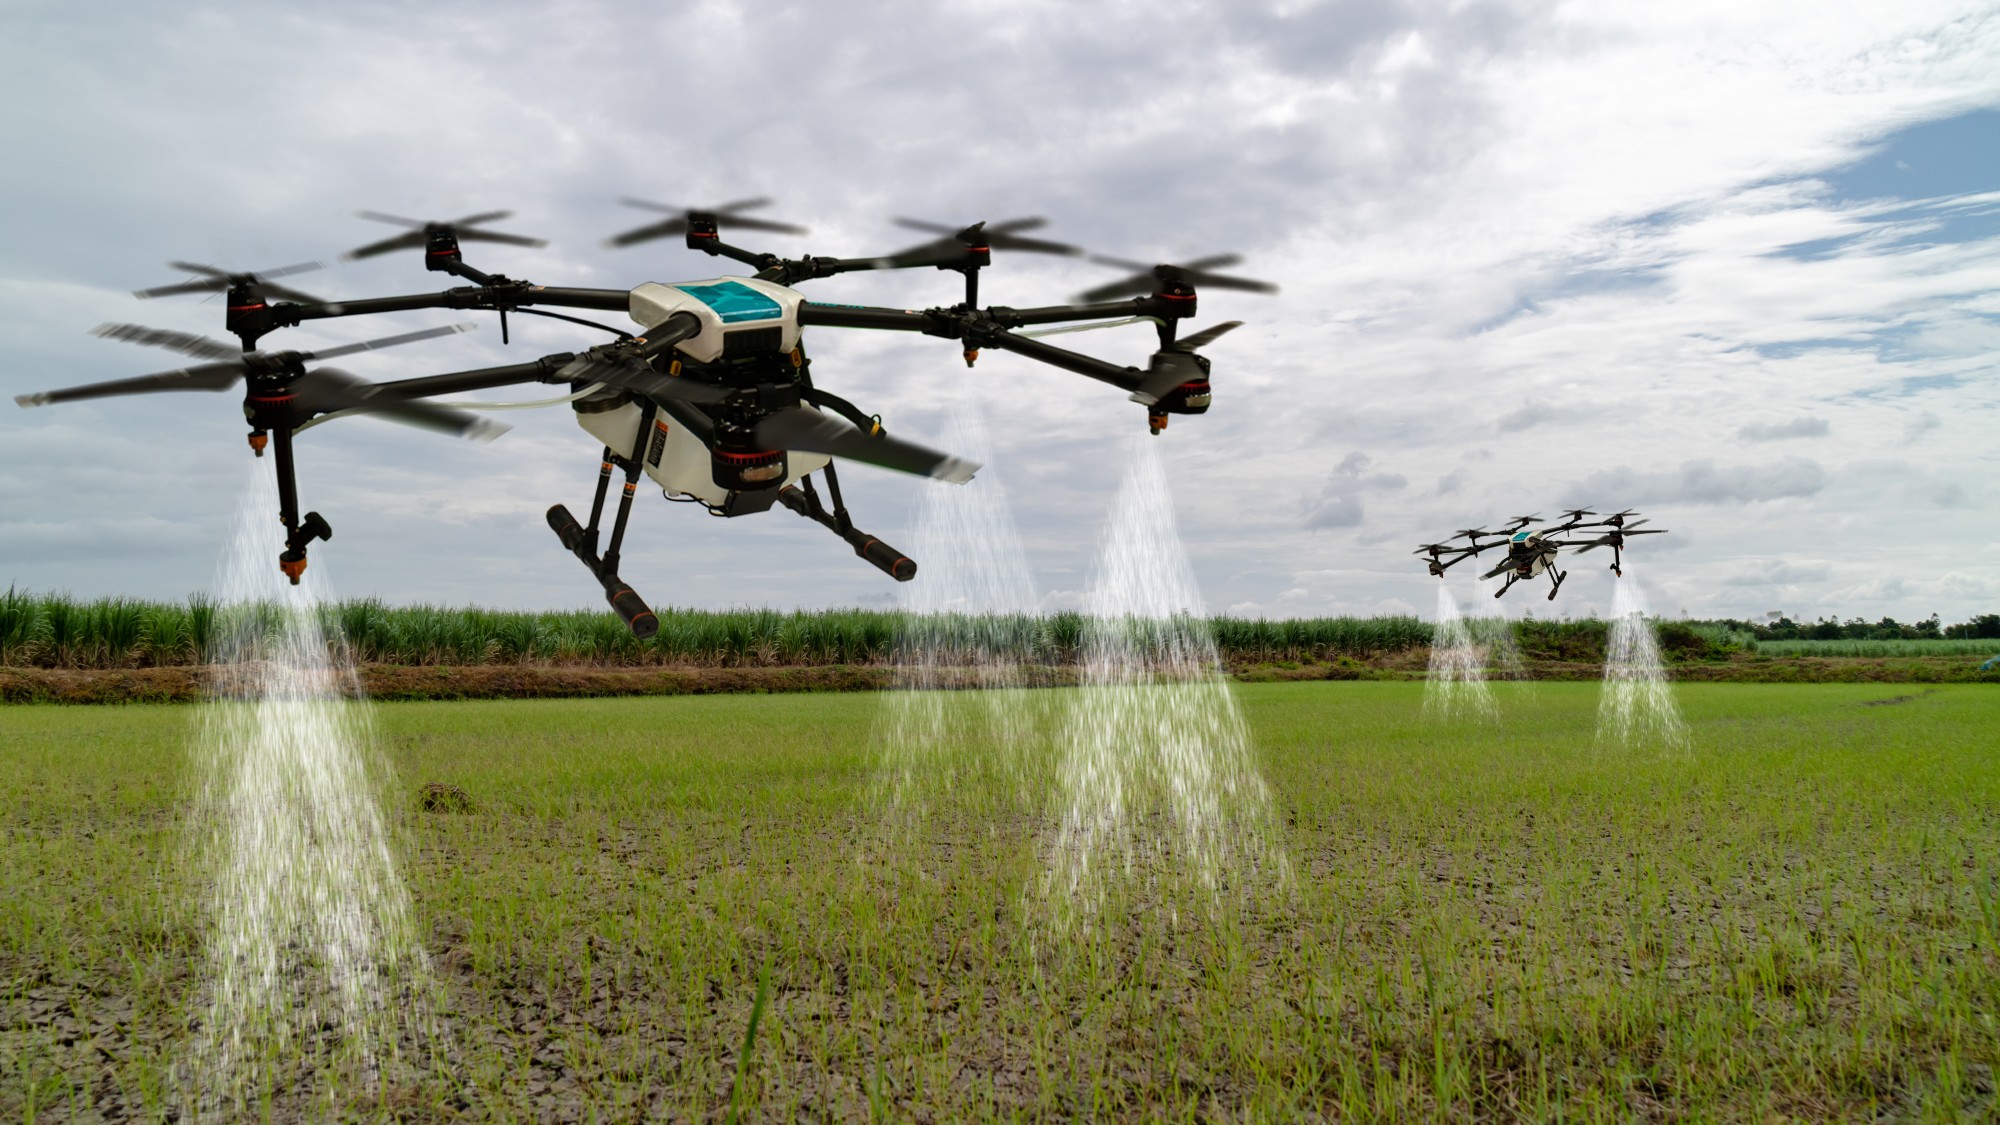 Two large drones are spraying young crops